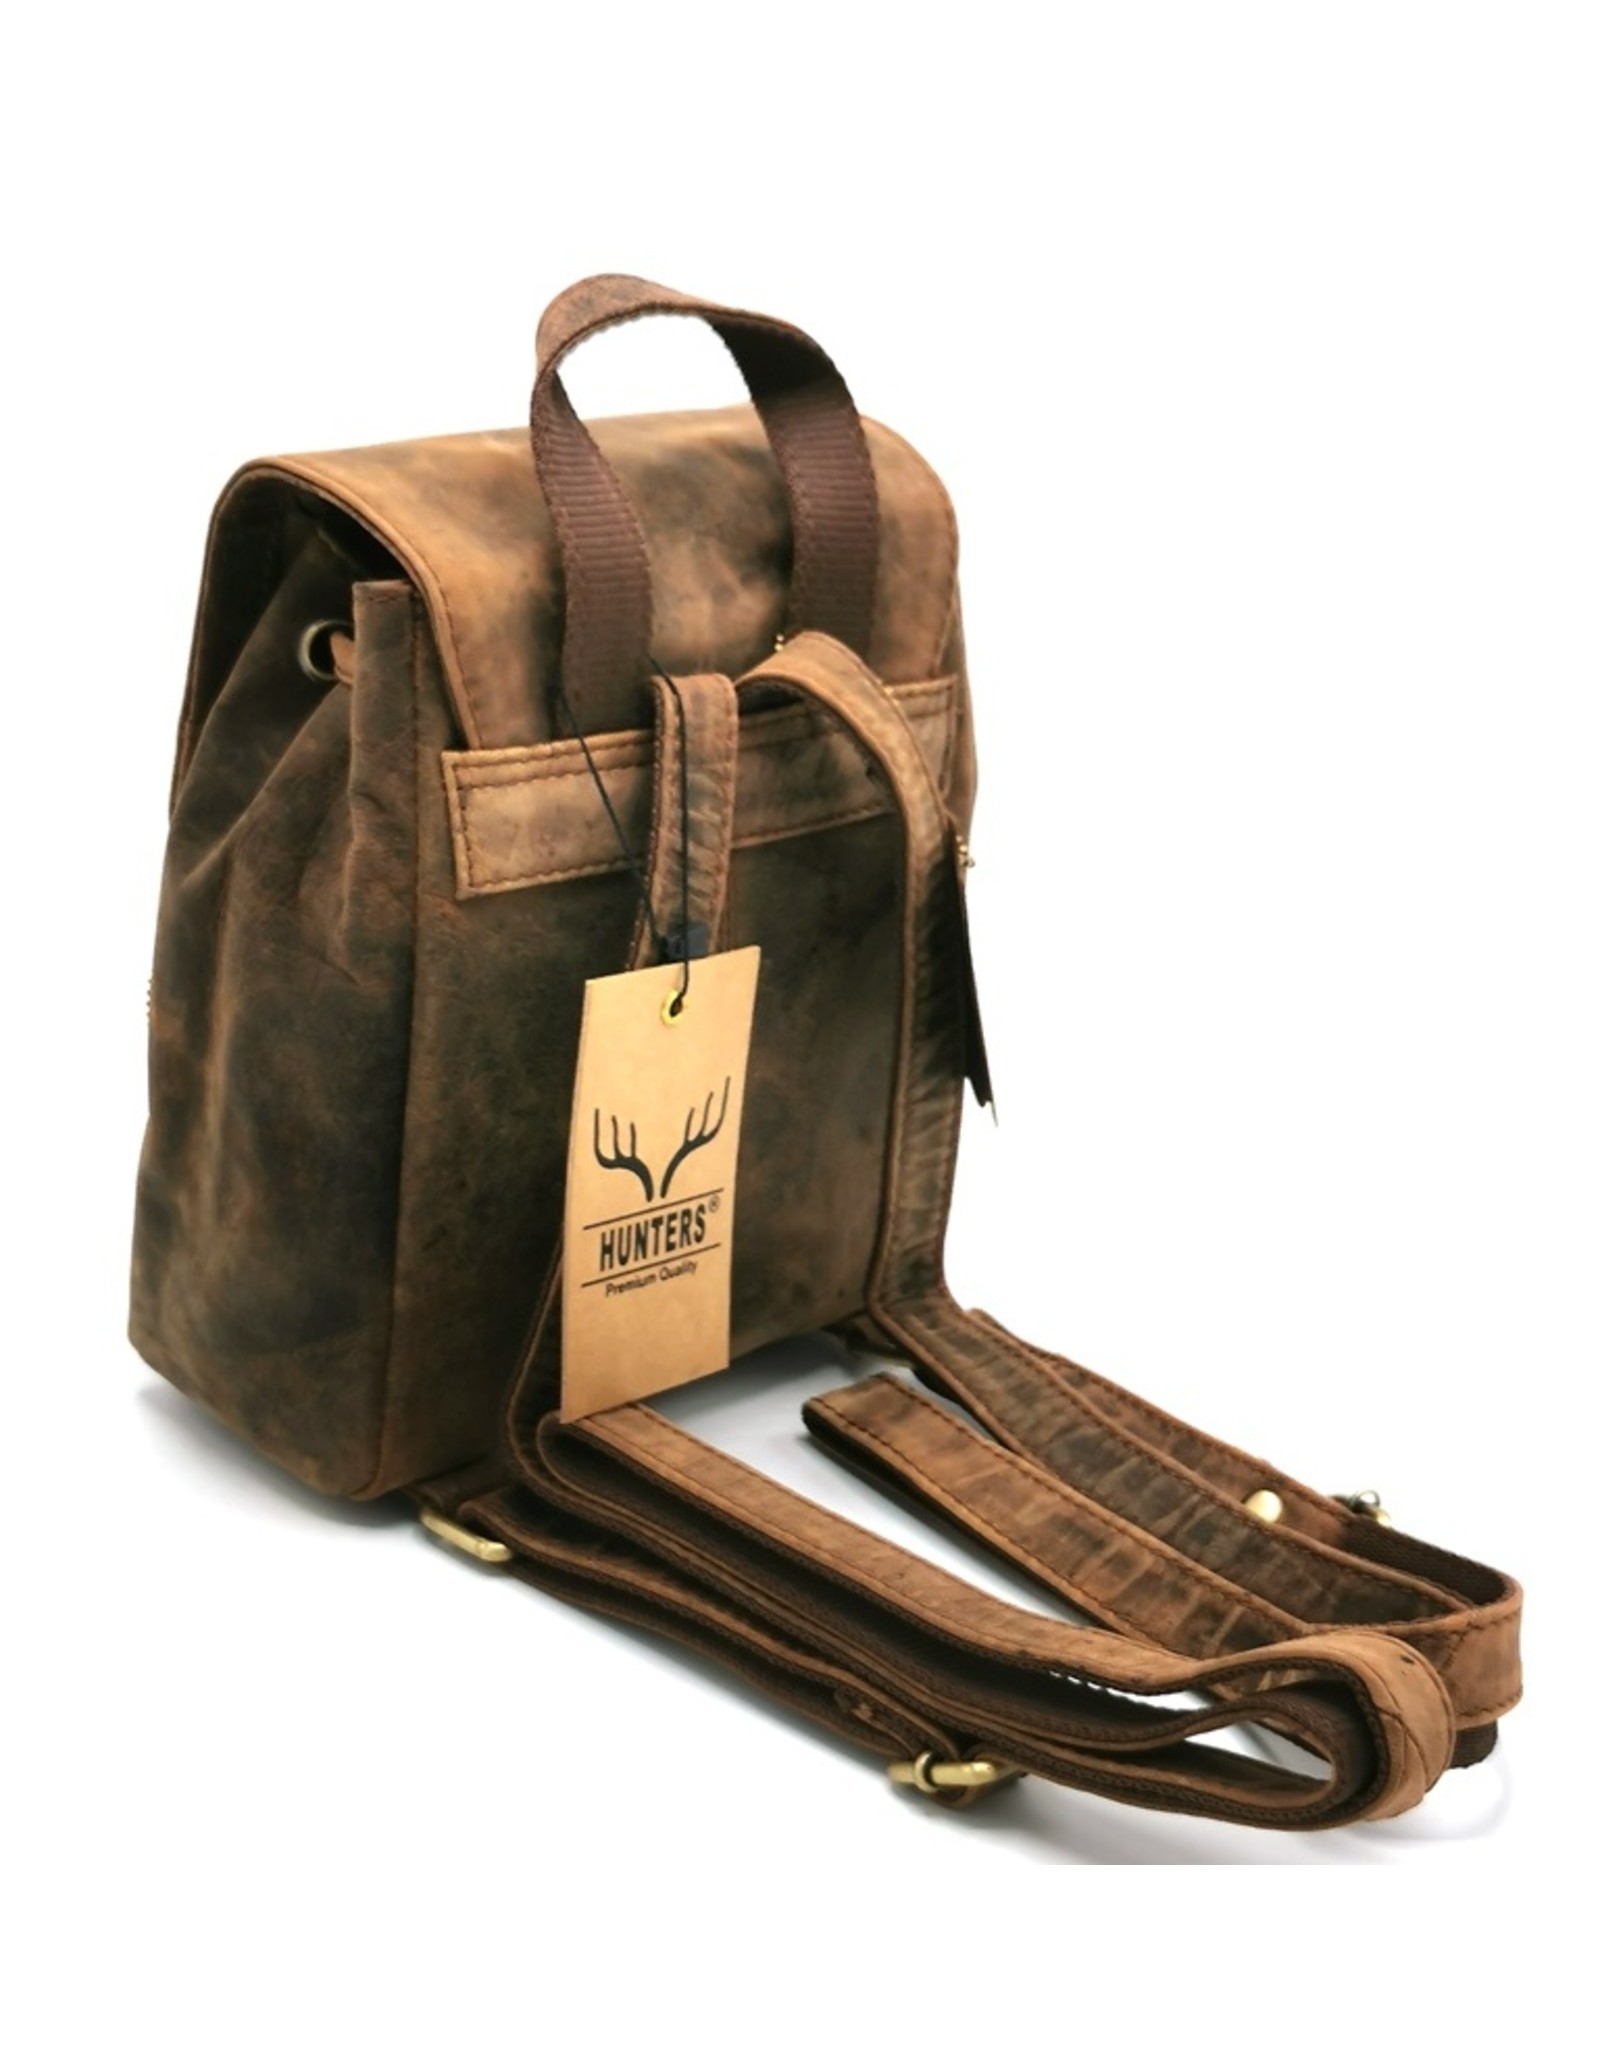 Hunters Leather backpacks  and leather shoppers - Leather Backpack Hunters brown